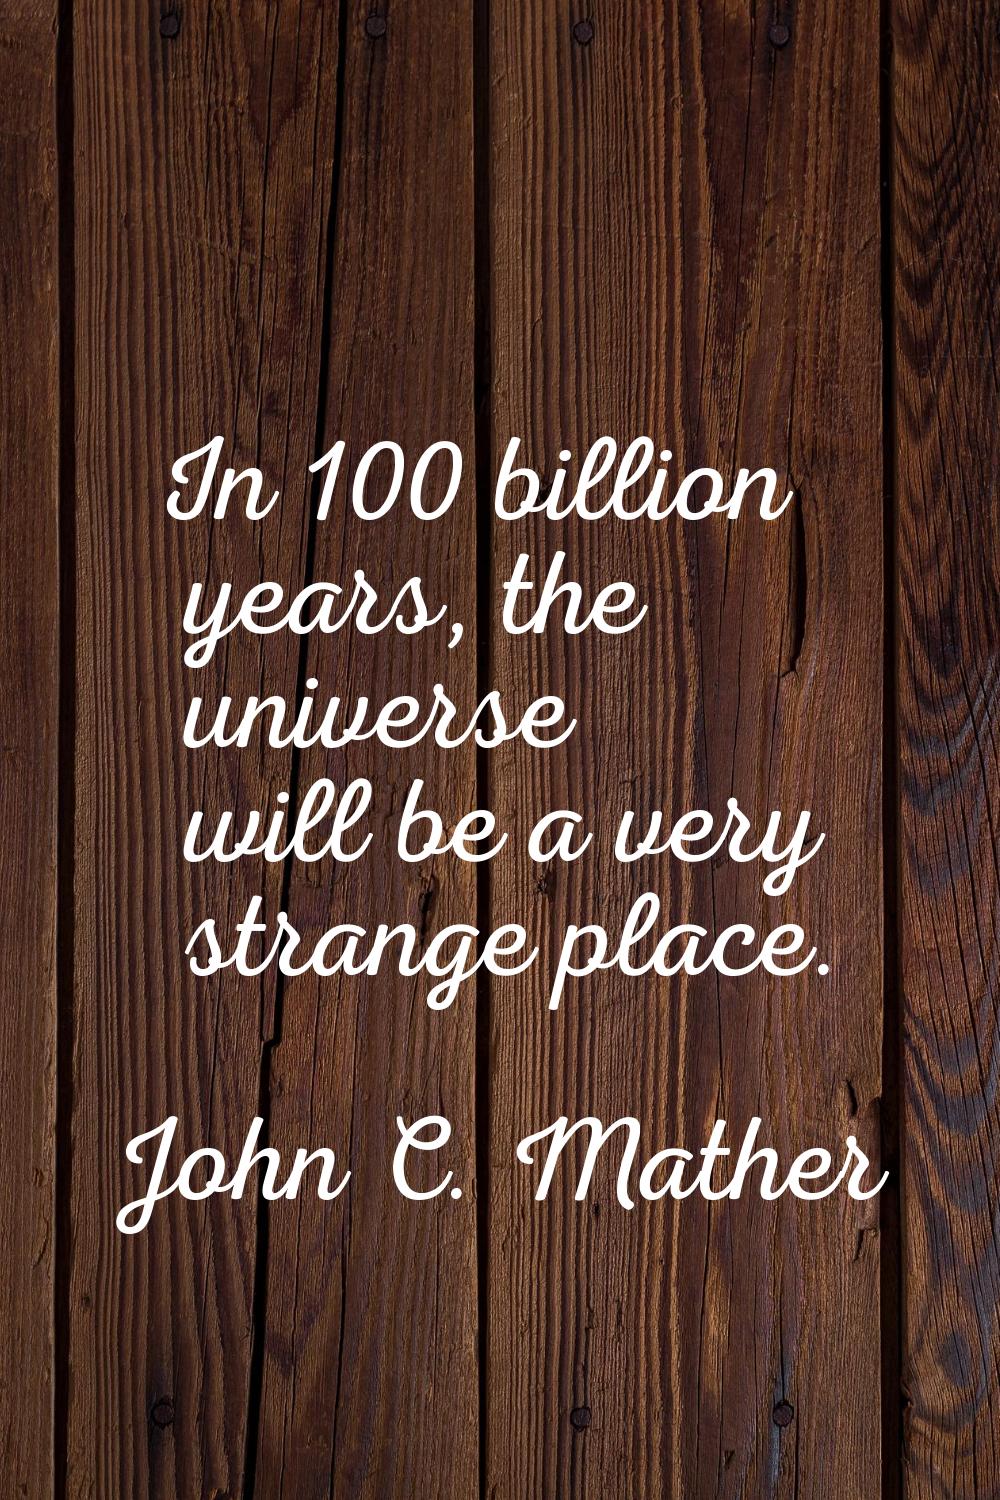 In 100 billion years, the universe will be a very strange place.